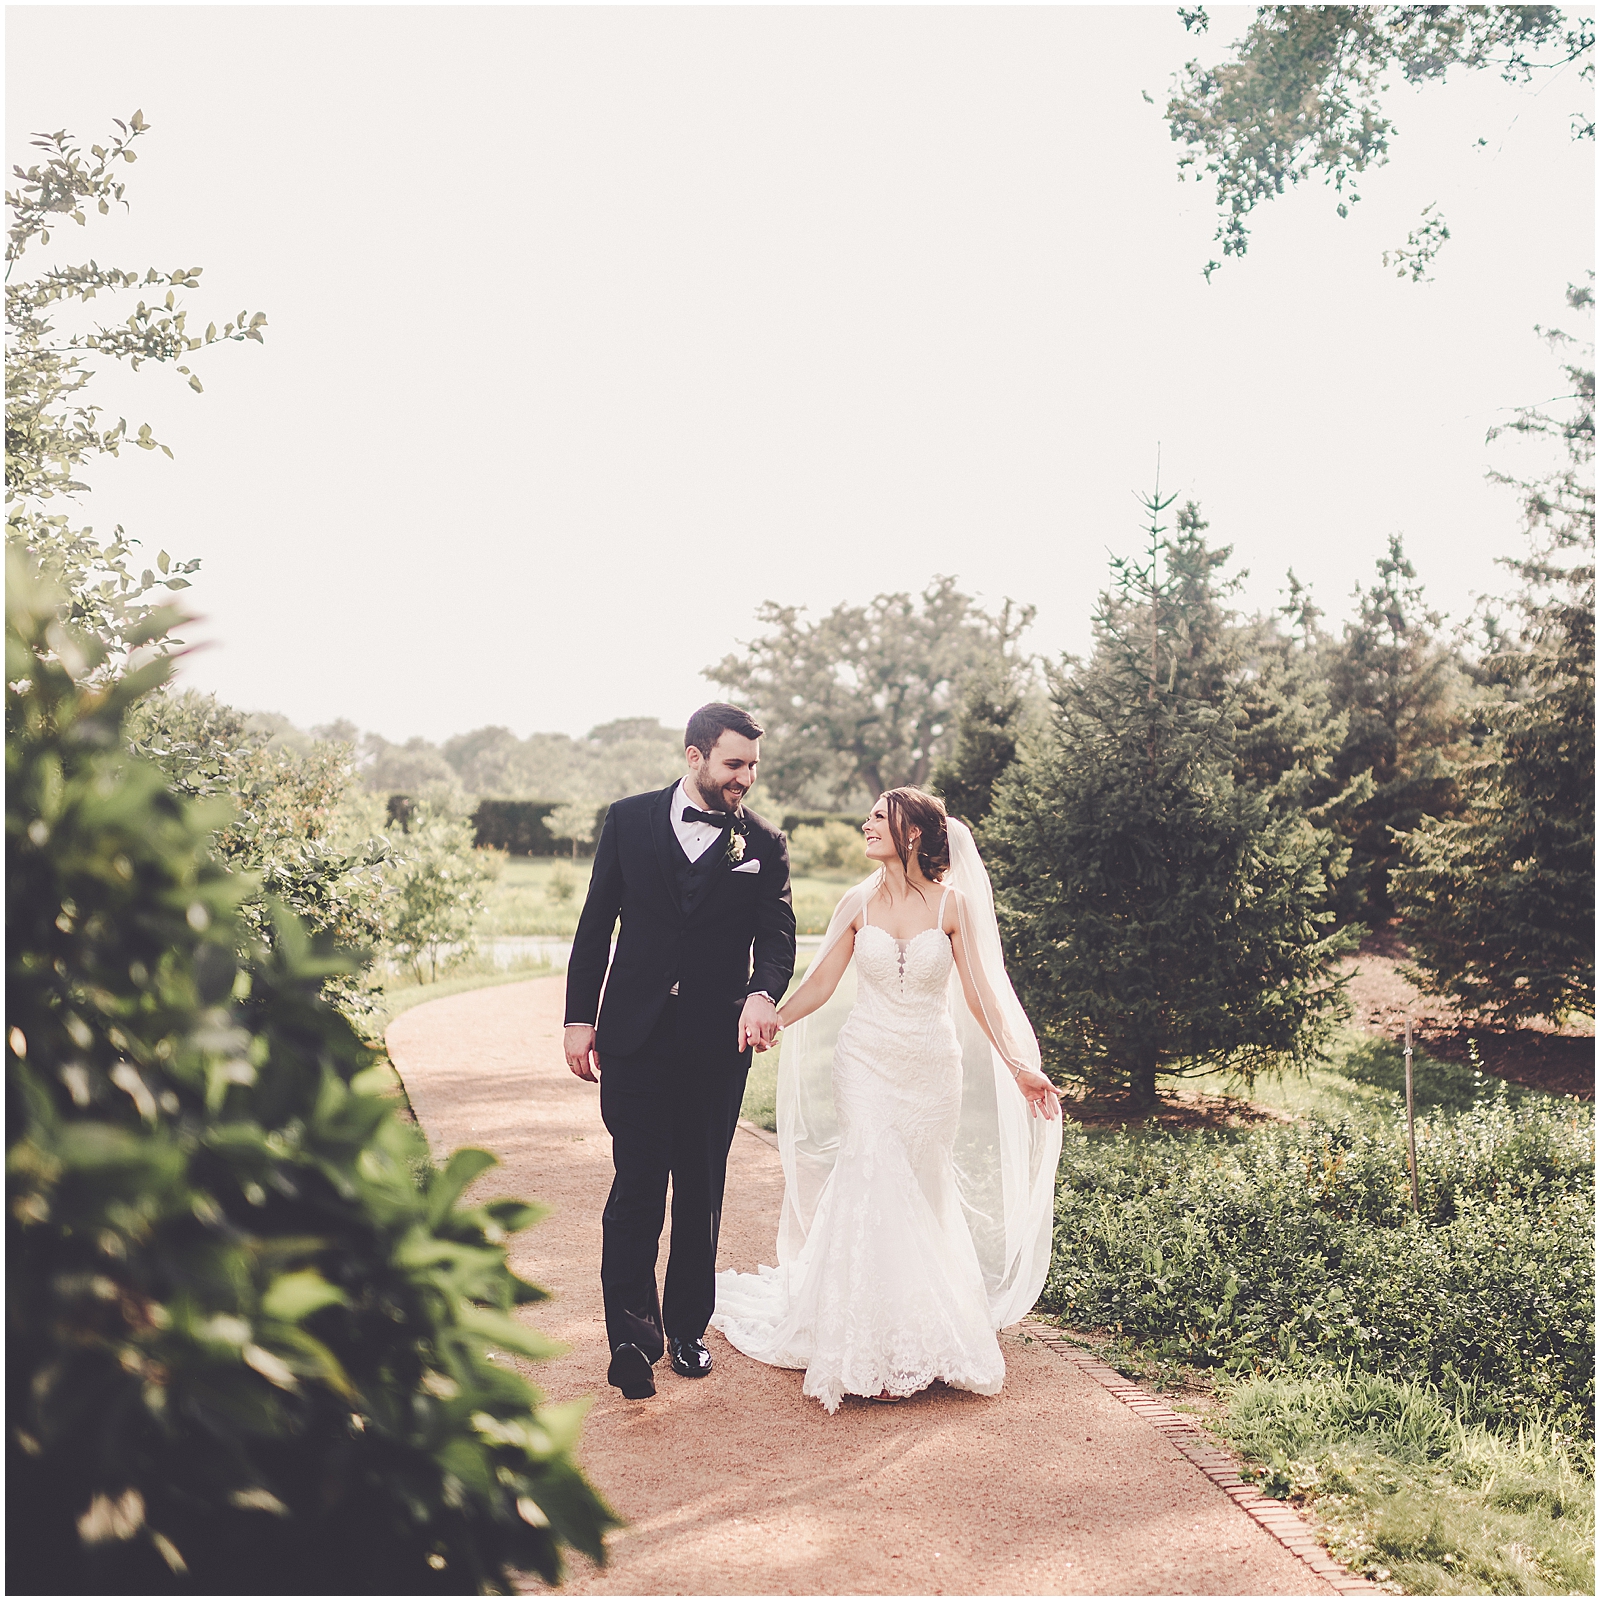 Kelsey and Justin's classic summer Gaslite Manor Banquets wedding in Aurora with Chicagoland wedding photographer Kara Evans Photographer.